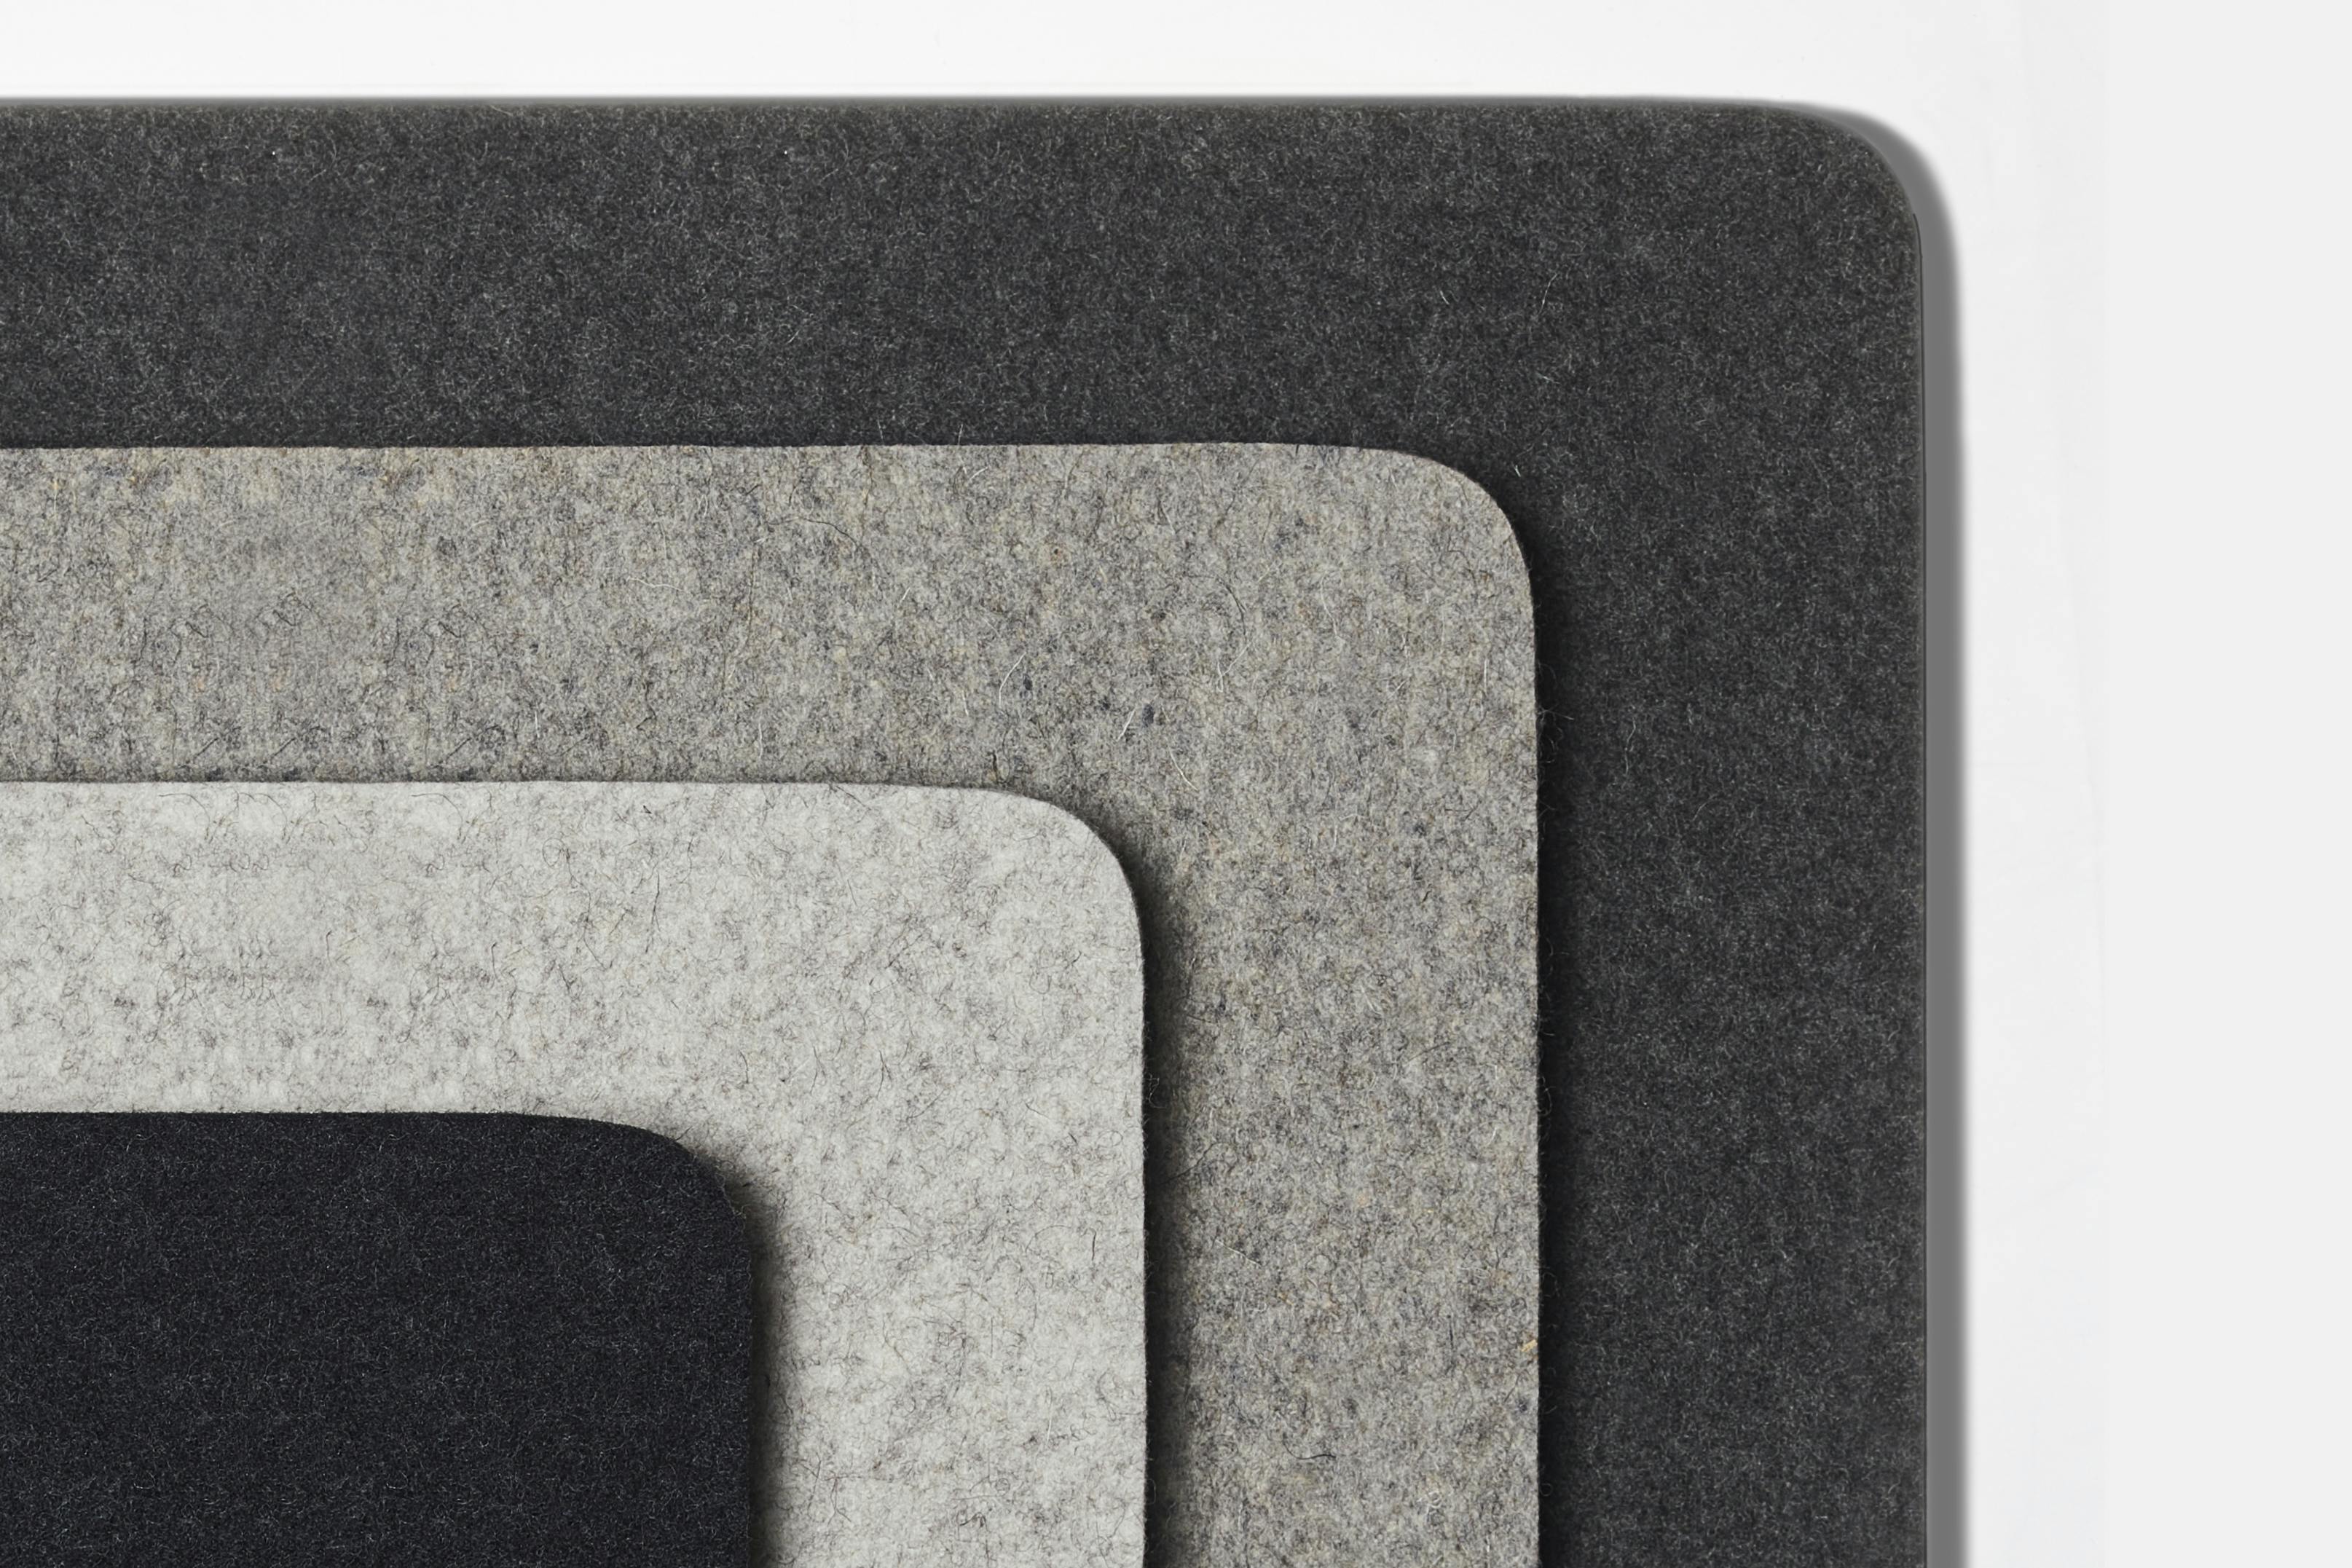 PDP Image: Felt Tops (The Tray / Thunderstorm) - 3:2 - Four Stacked